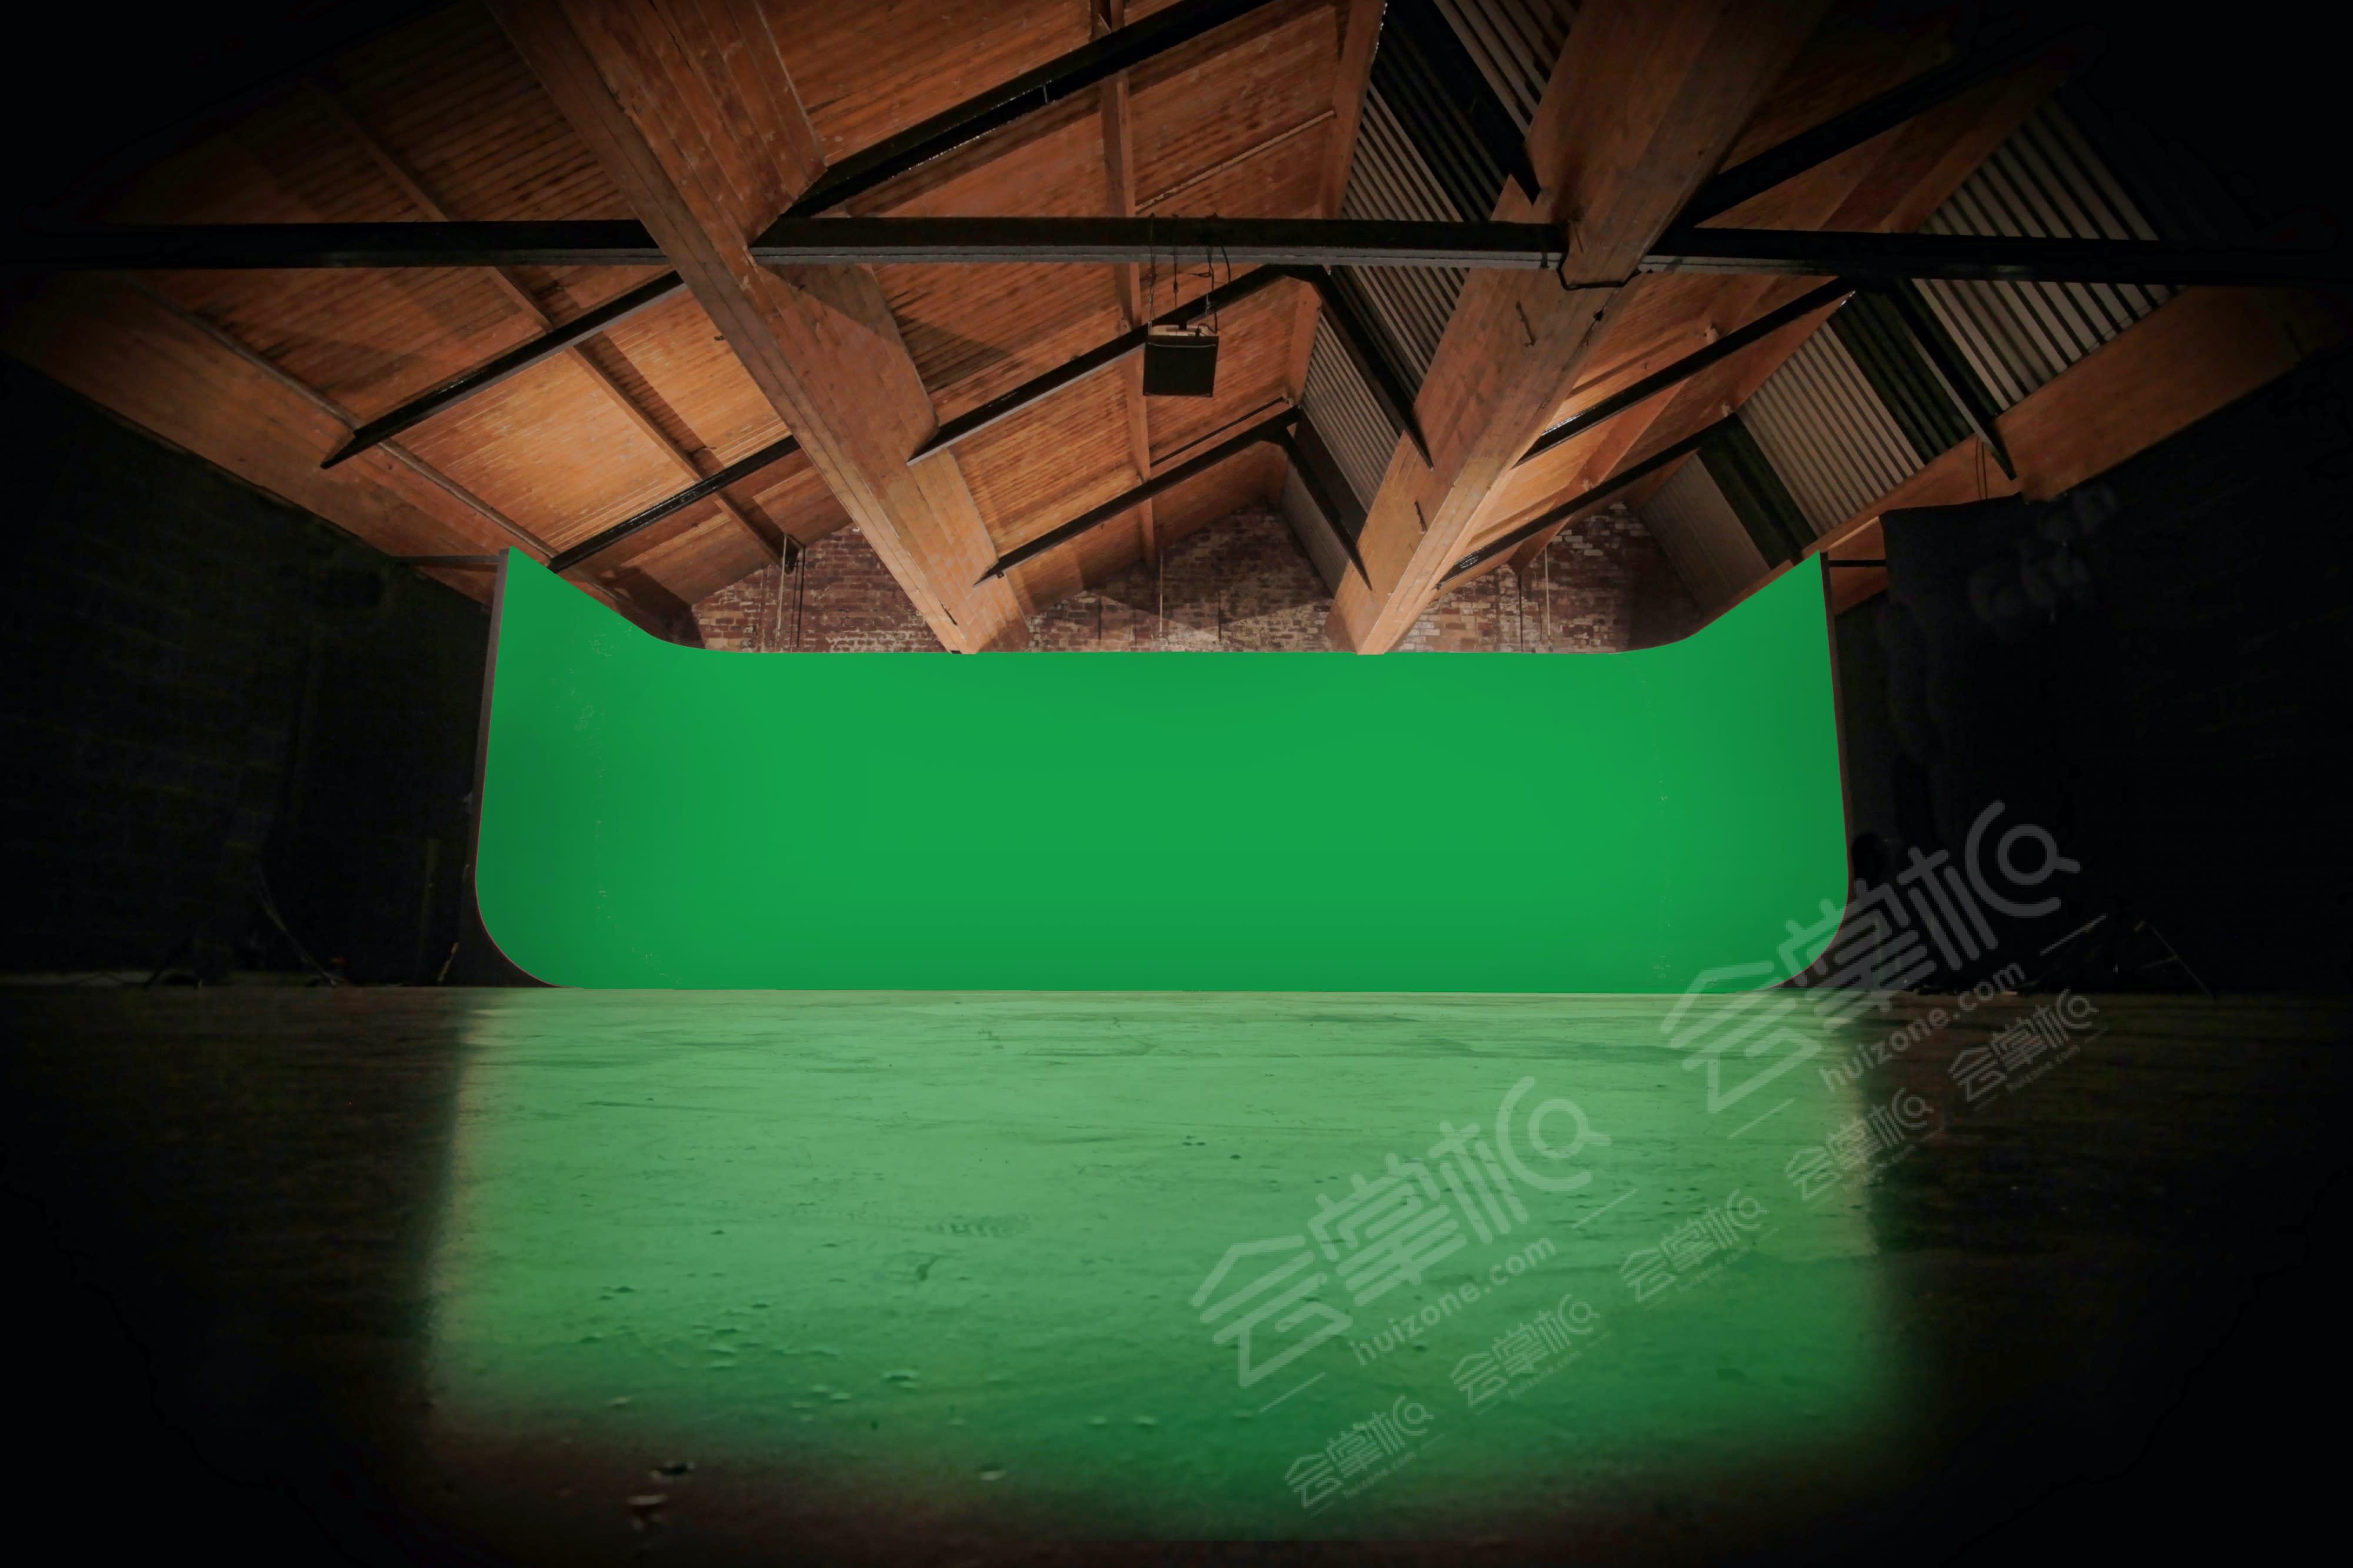 Music Video Studio with set build, blackout, green screen and infinity cove.